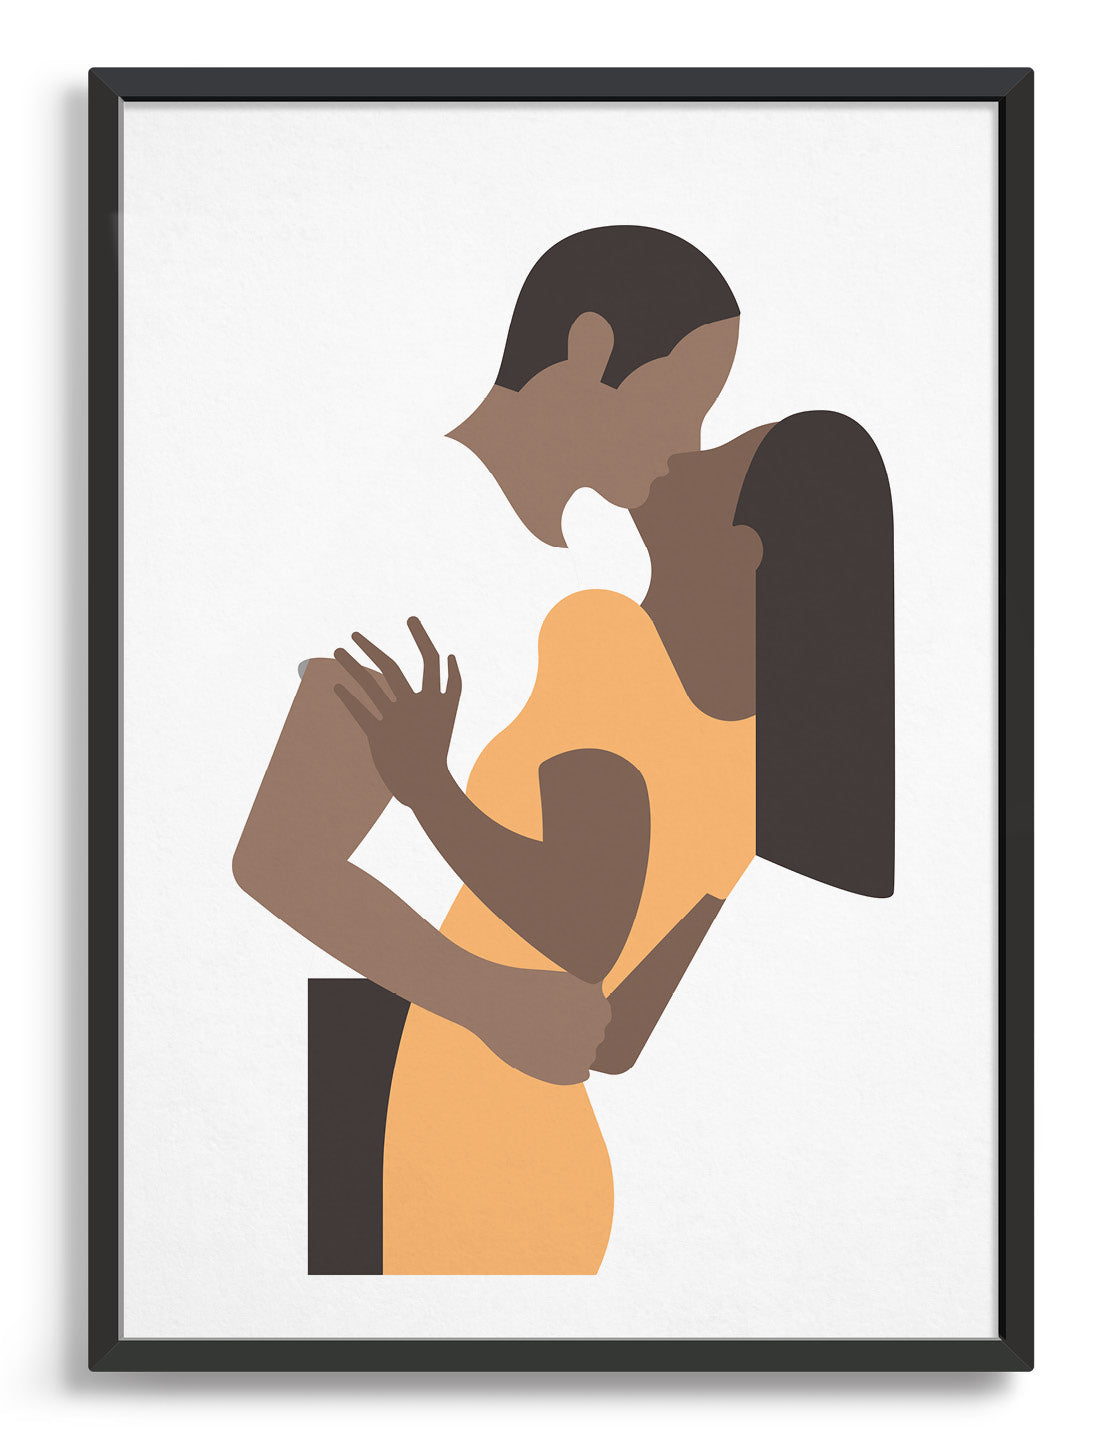 White poster print depicts a couple in an embrace kissing. The woman is on the right wearing a yellow dress and the man's white t-shirt blends with the background